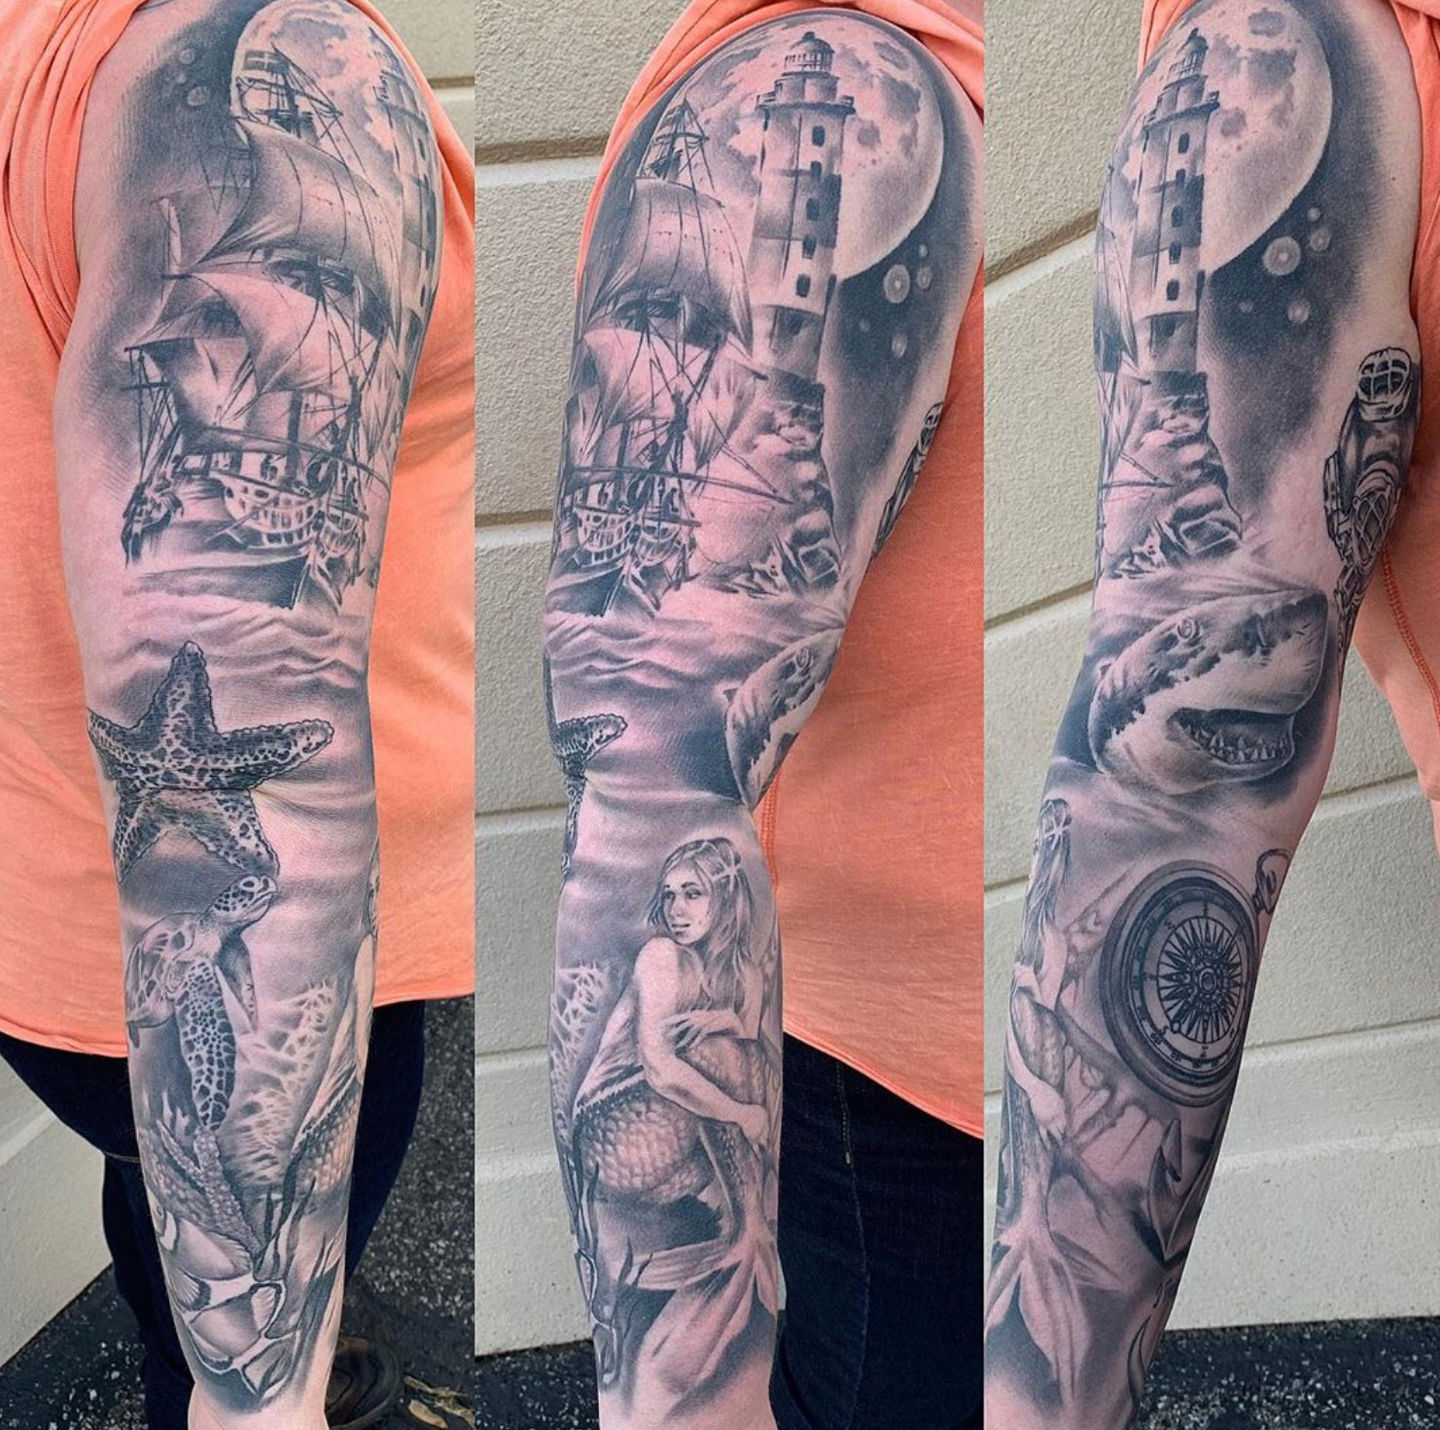 Finished up more of my storming ocean sleeve Done by Jory at Lake Erie  Studio in point place Ohio  rtattoo